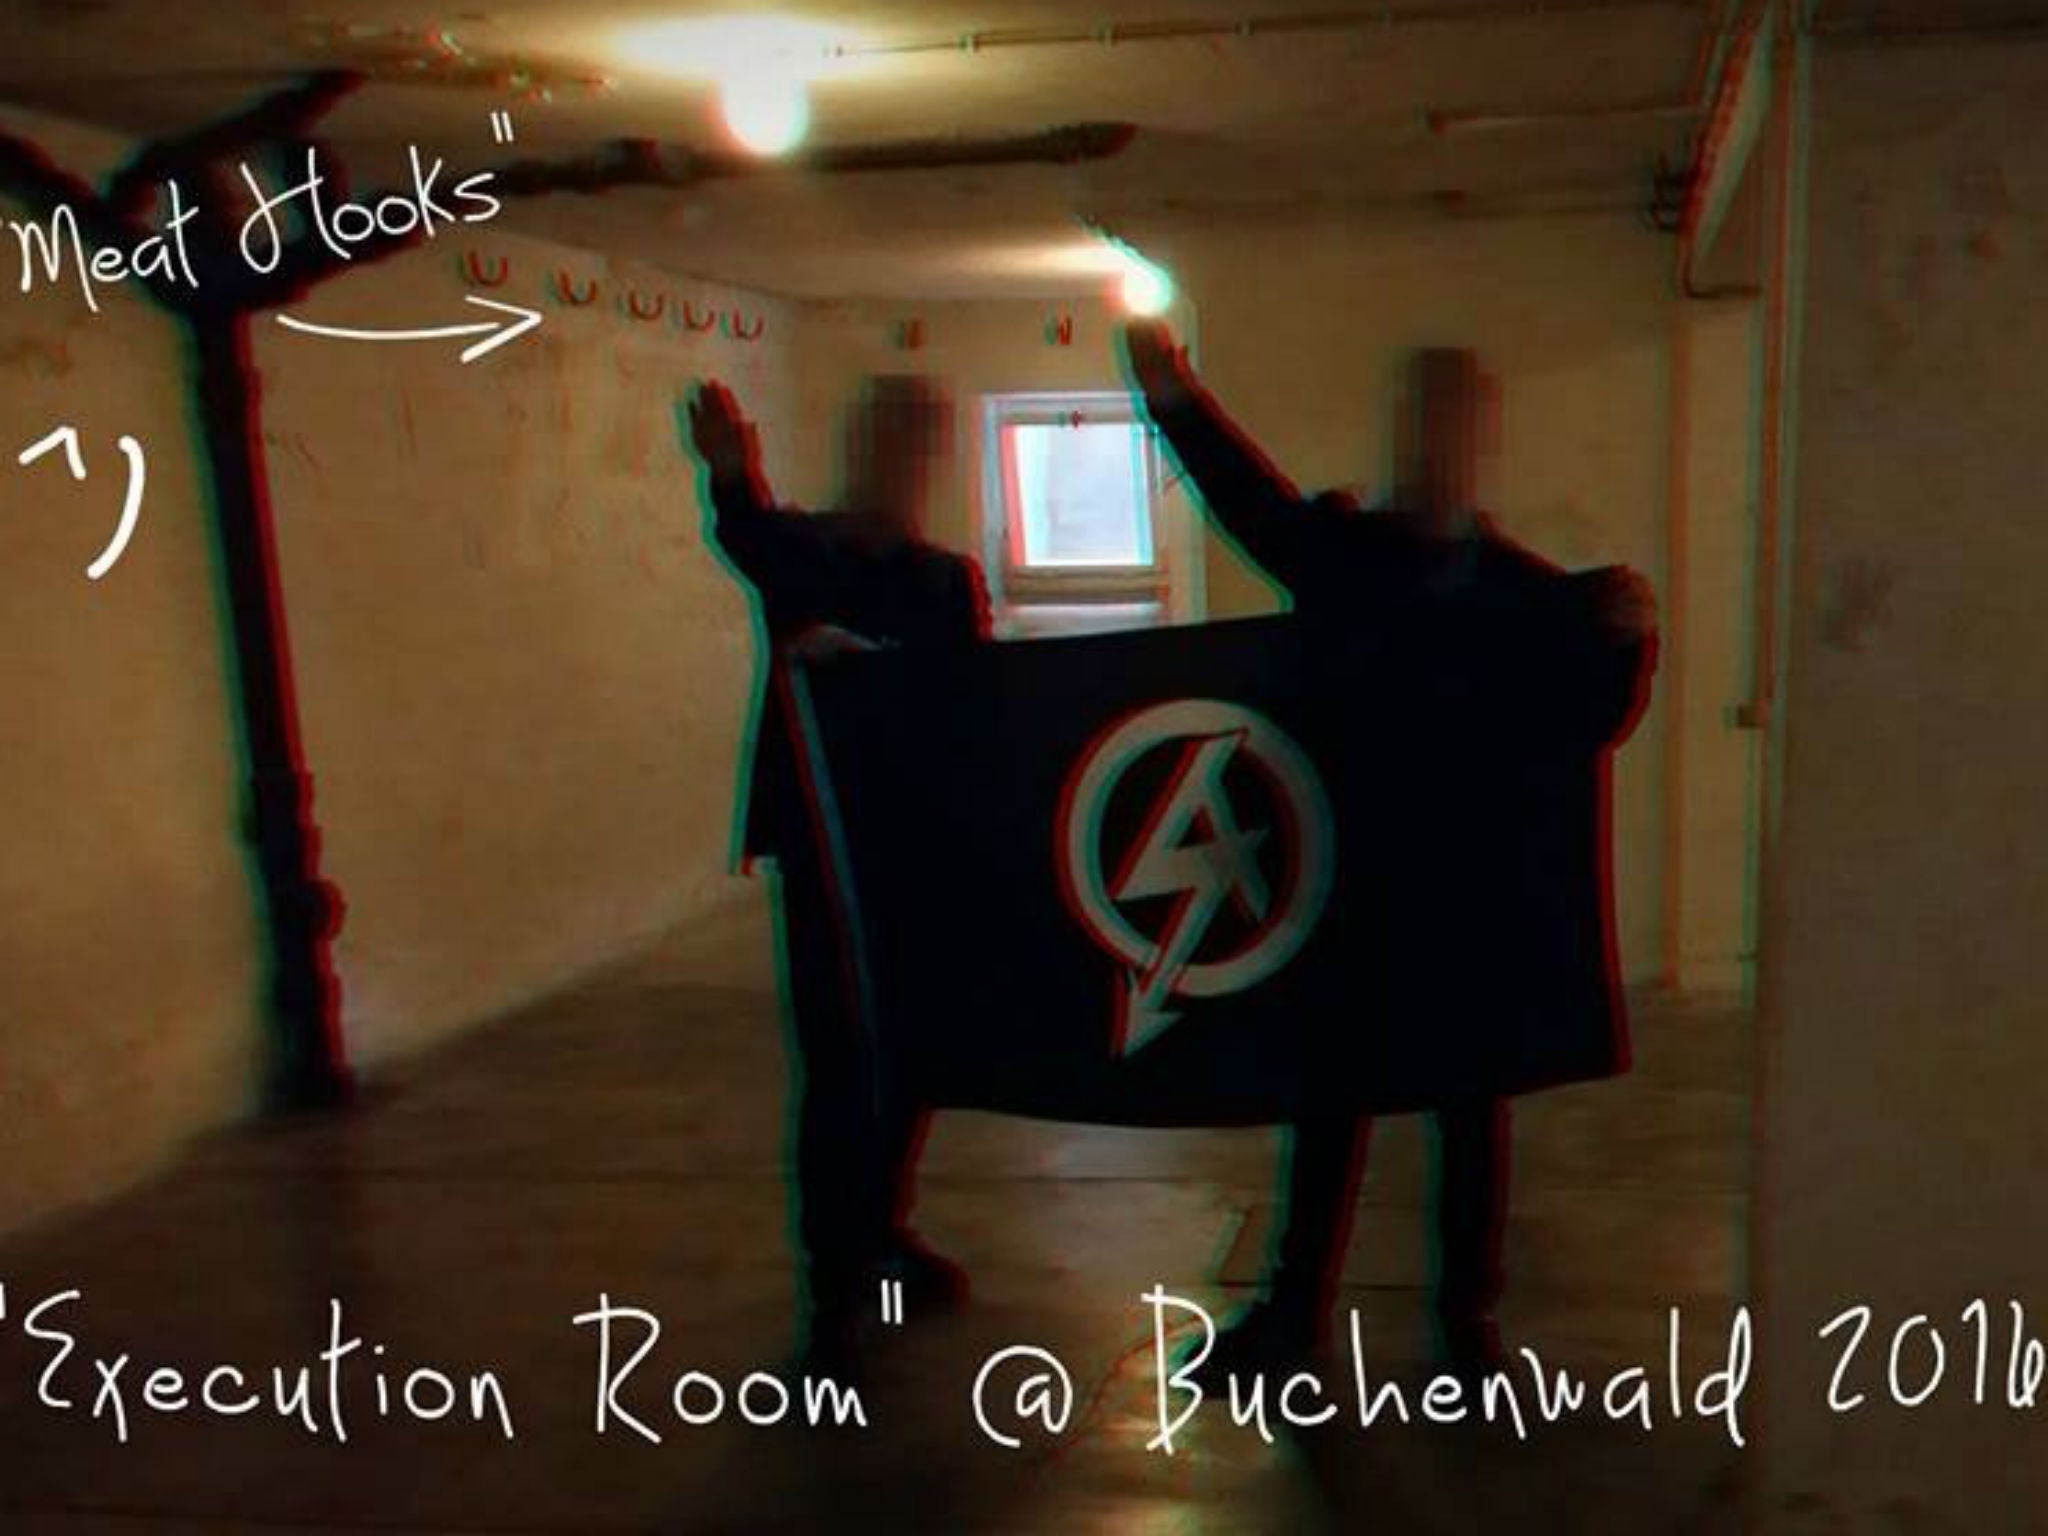 National Action shared a photo of supporters performing Hitler salutes at a Nazi concentration camp